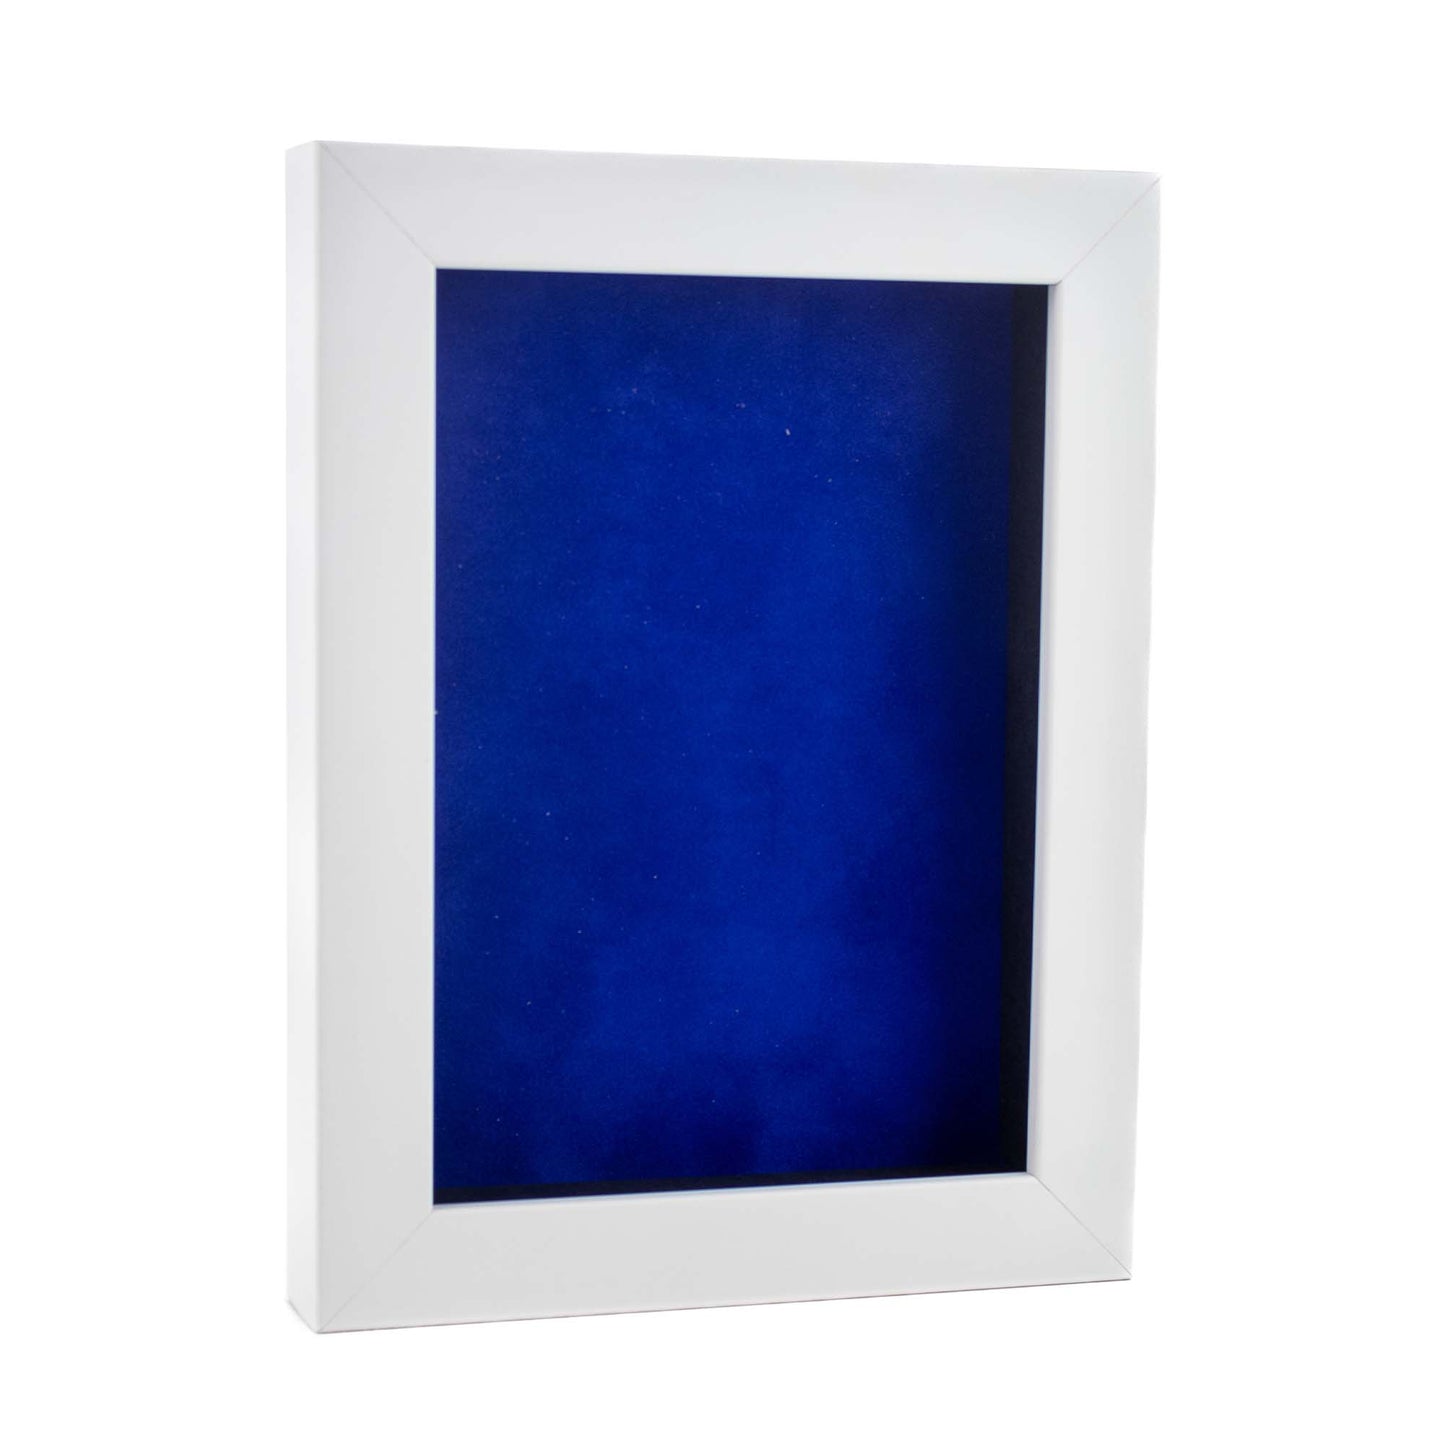 White Shadow Box Frame With Royal Blue Acid-Free Suede Backing